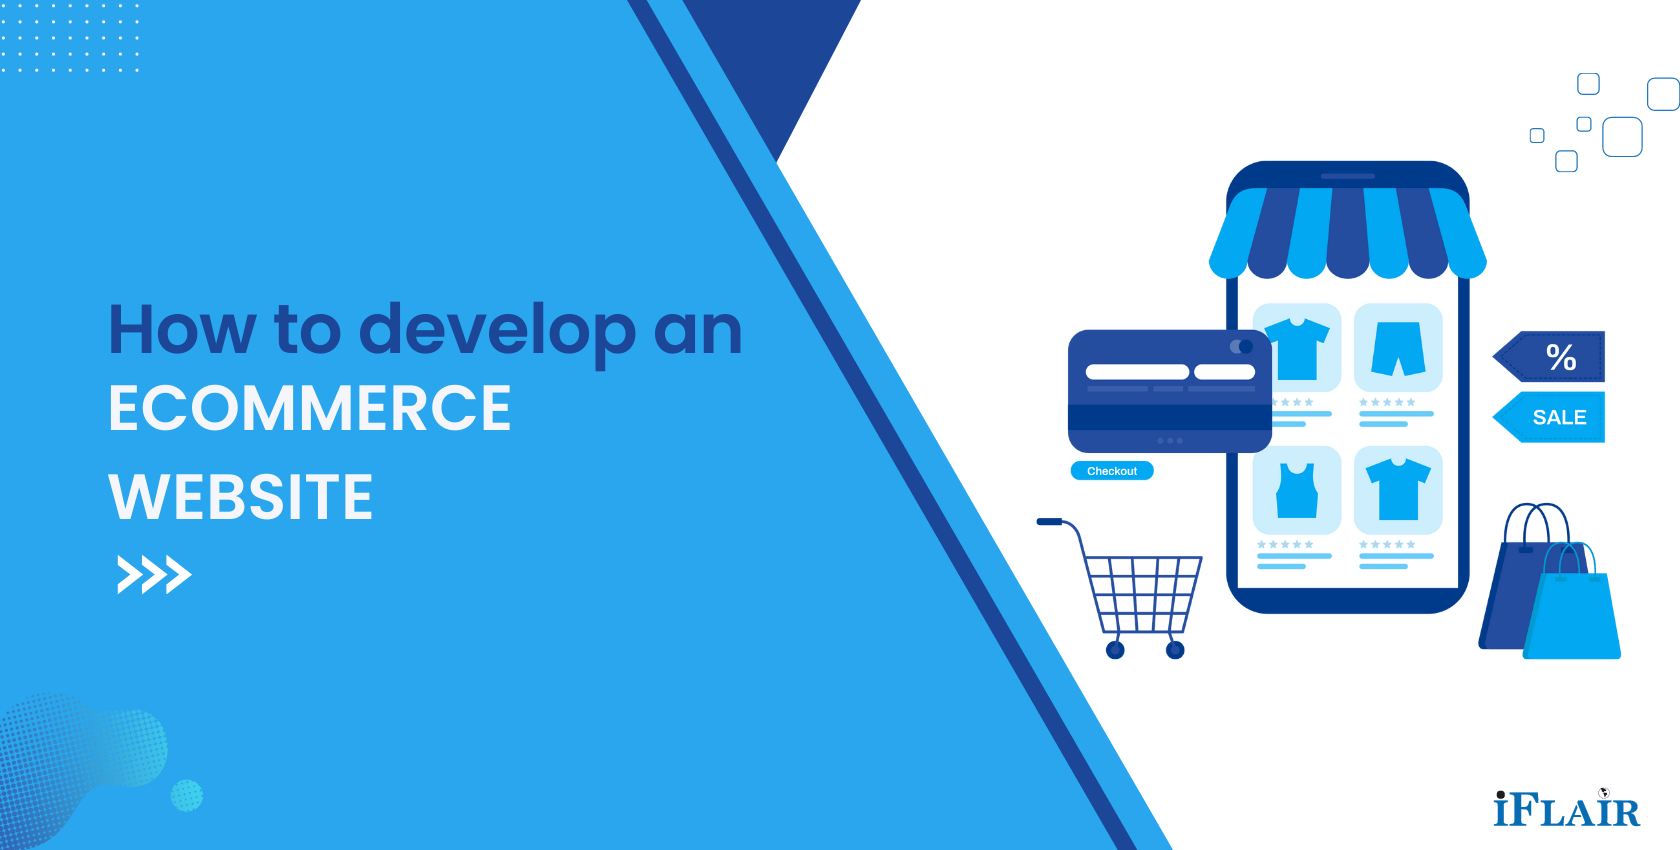 How Do You Develop An Ecommerce Website?